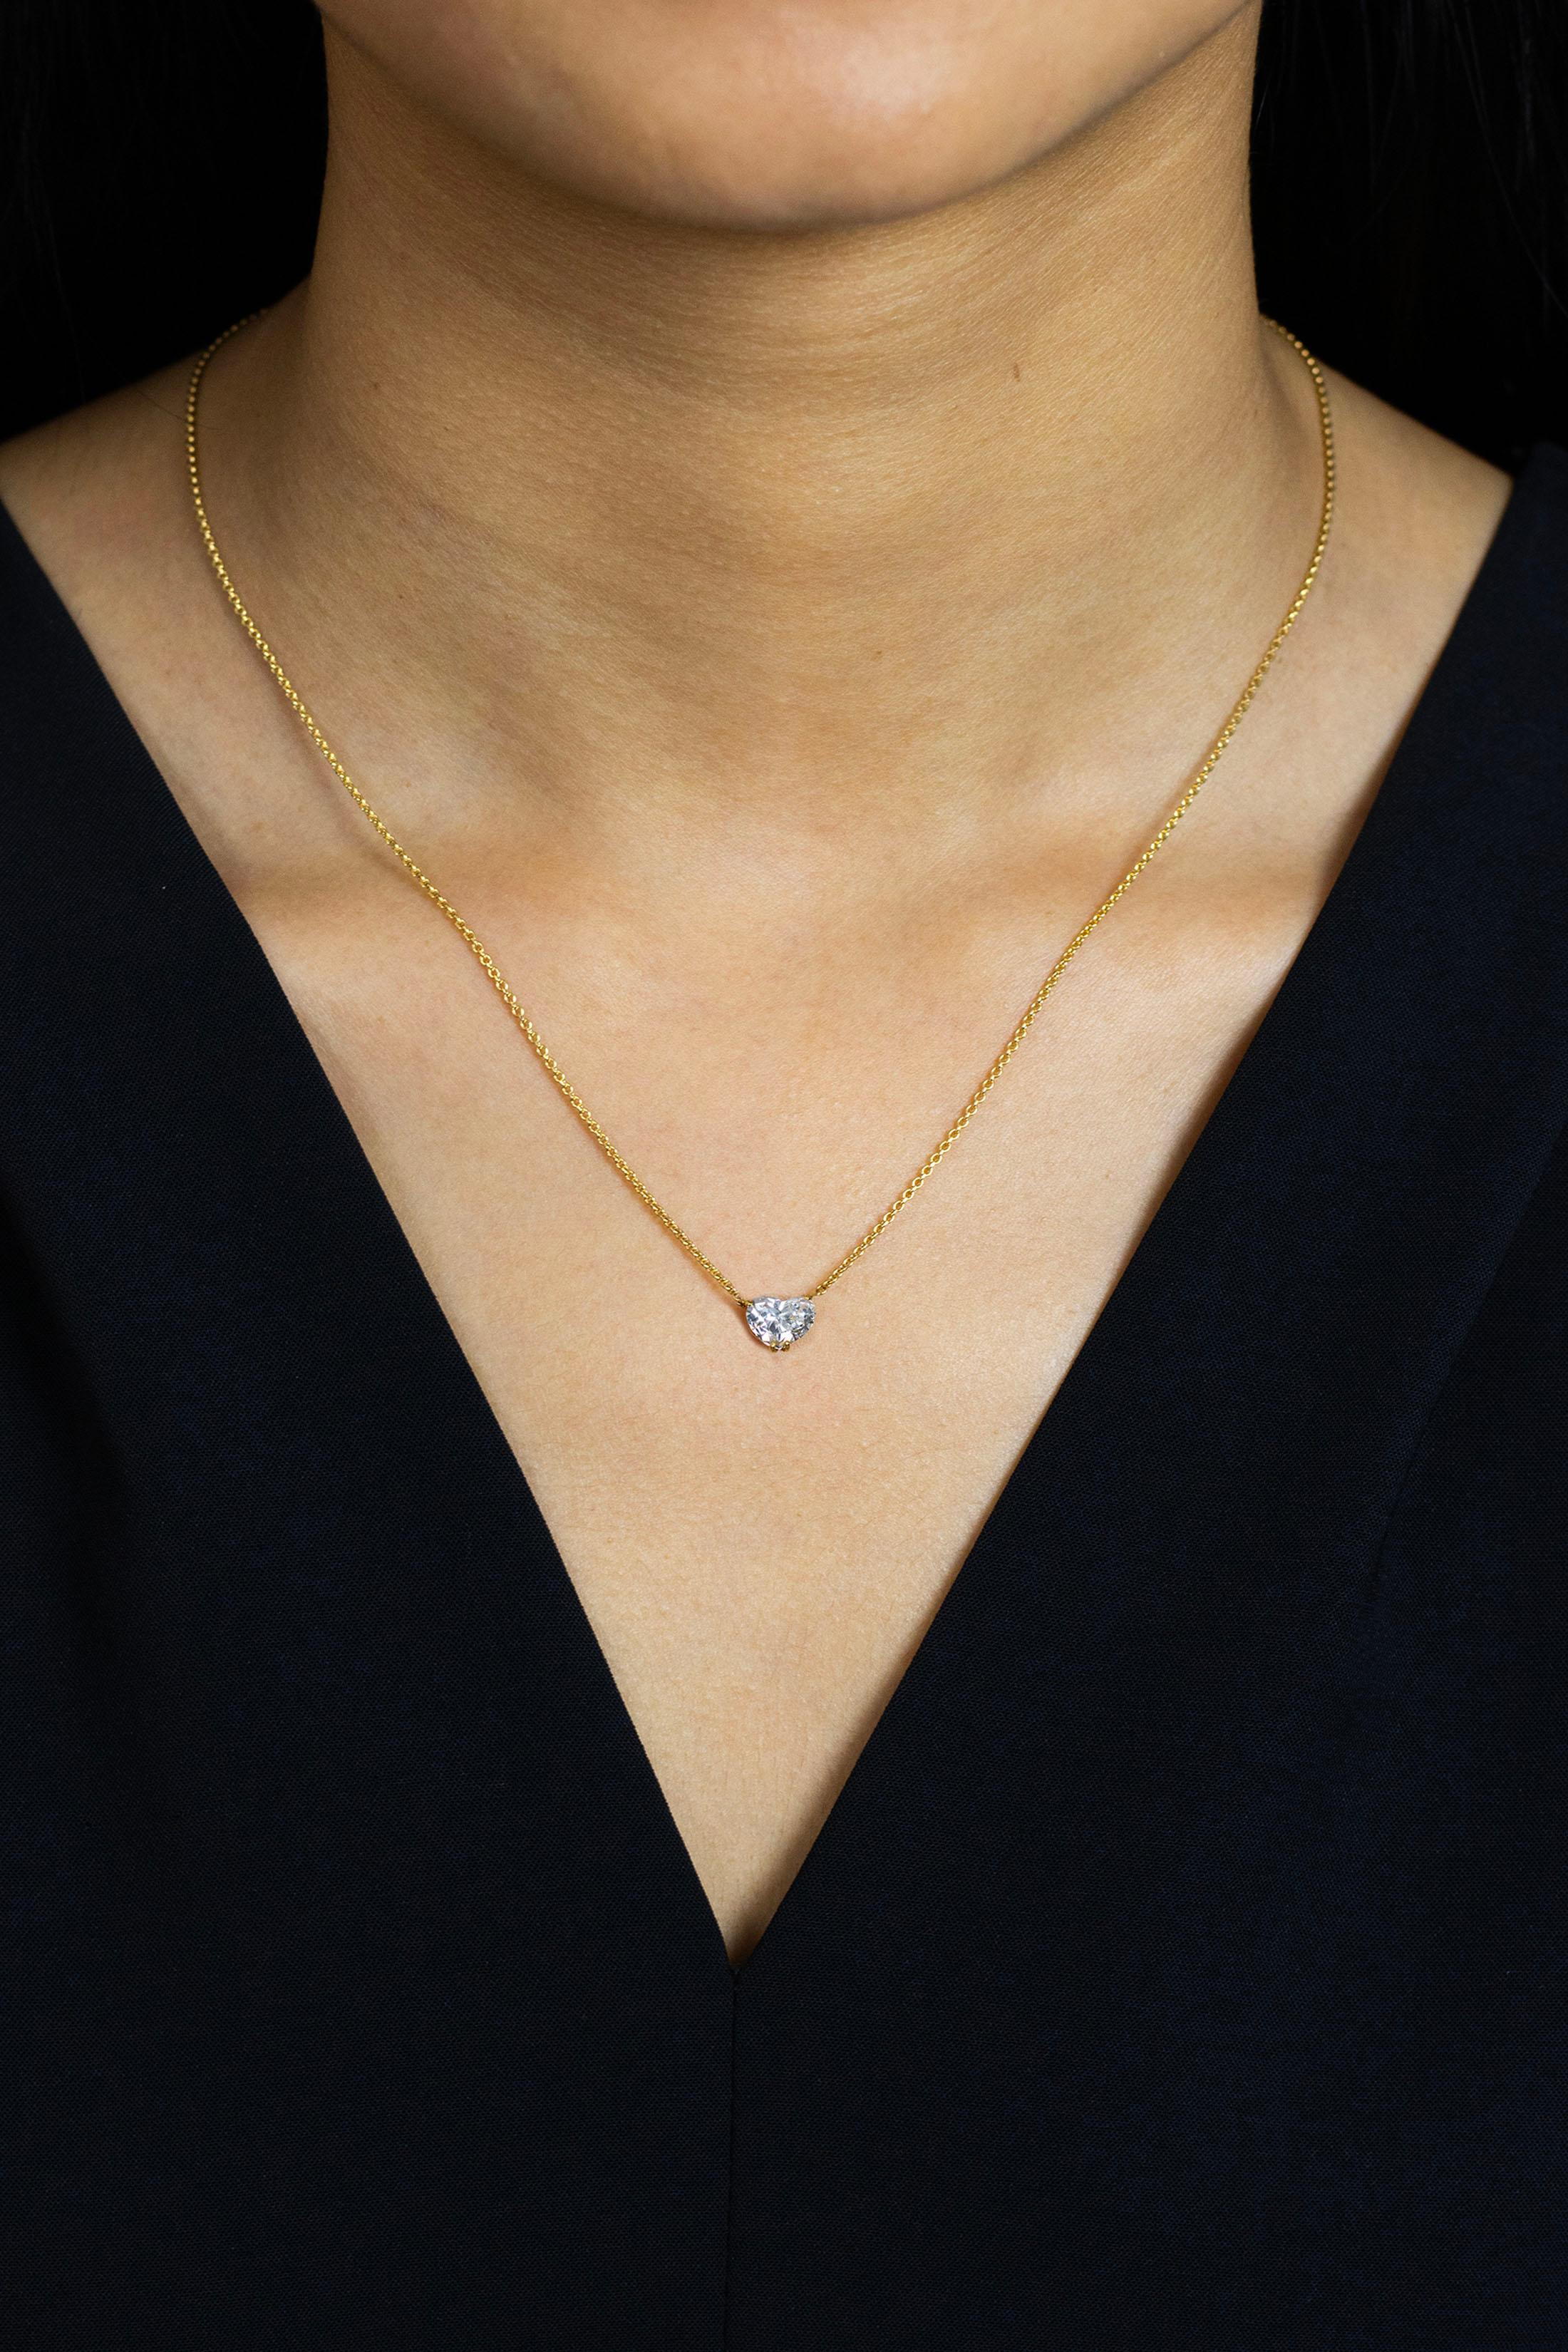 A classic heart shape pendant necklace showcasing a 1.52 carats brilliant heart shape diamond certified by GIA as F color, SI1 clarity. The pendant is set on a 14k yellow gold basket and suspended on an adjustable 16 inch yellow gold chain.

Style